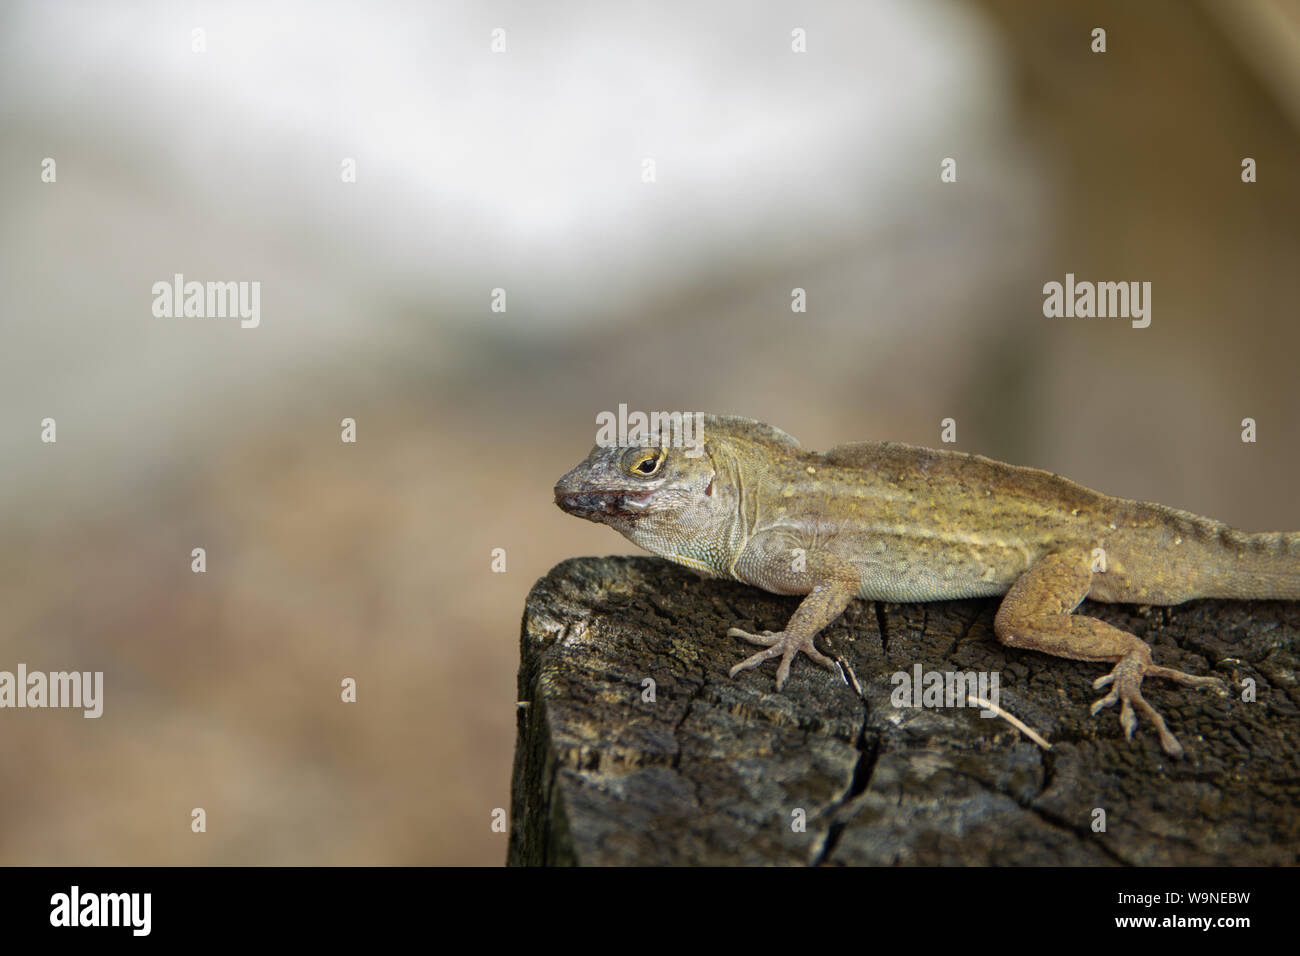 Male anole lizard hanging out on a wooden post with an injured mouth Stock Photo